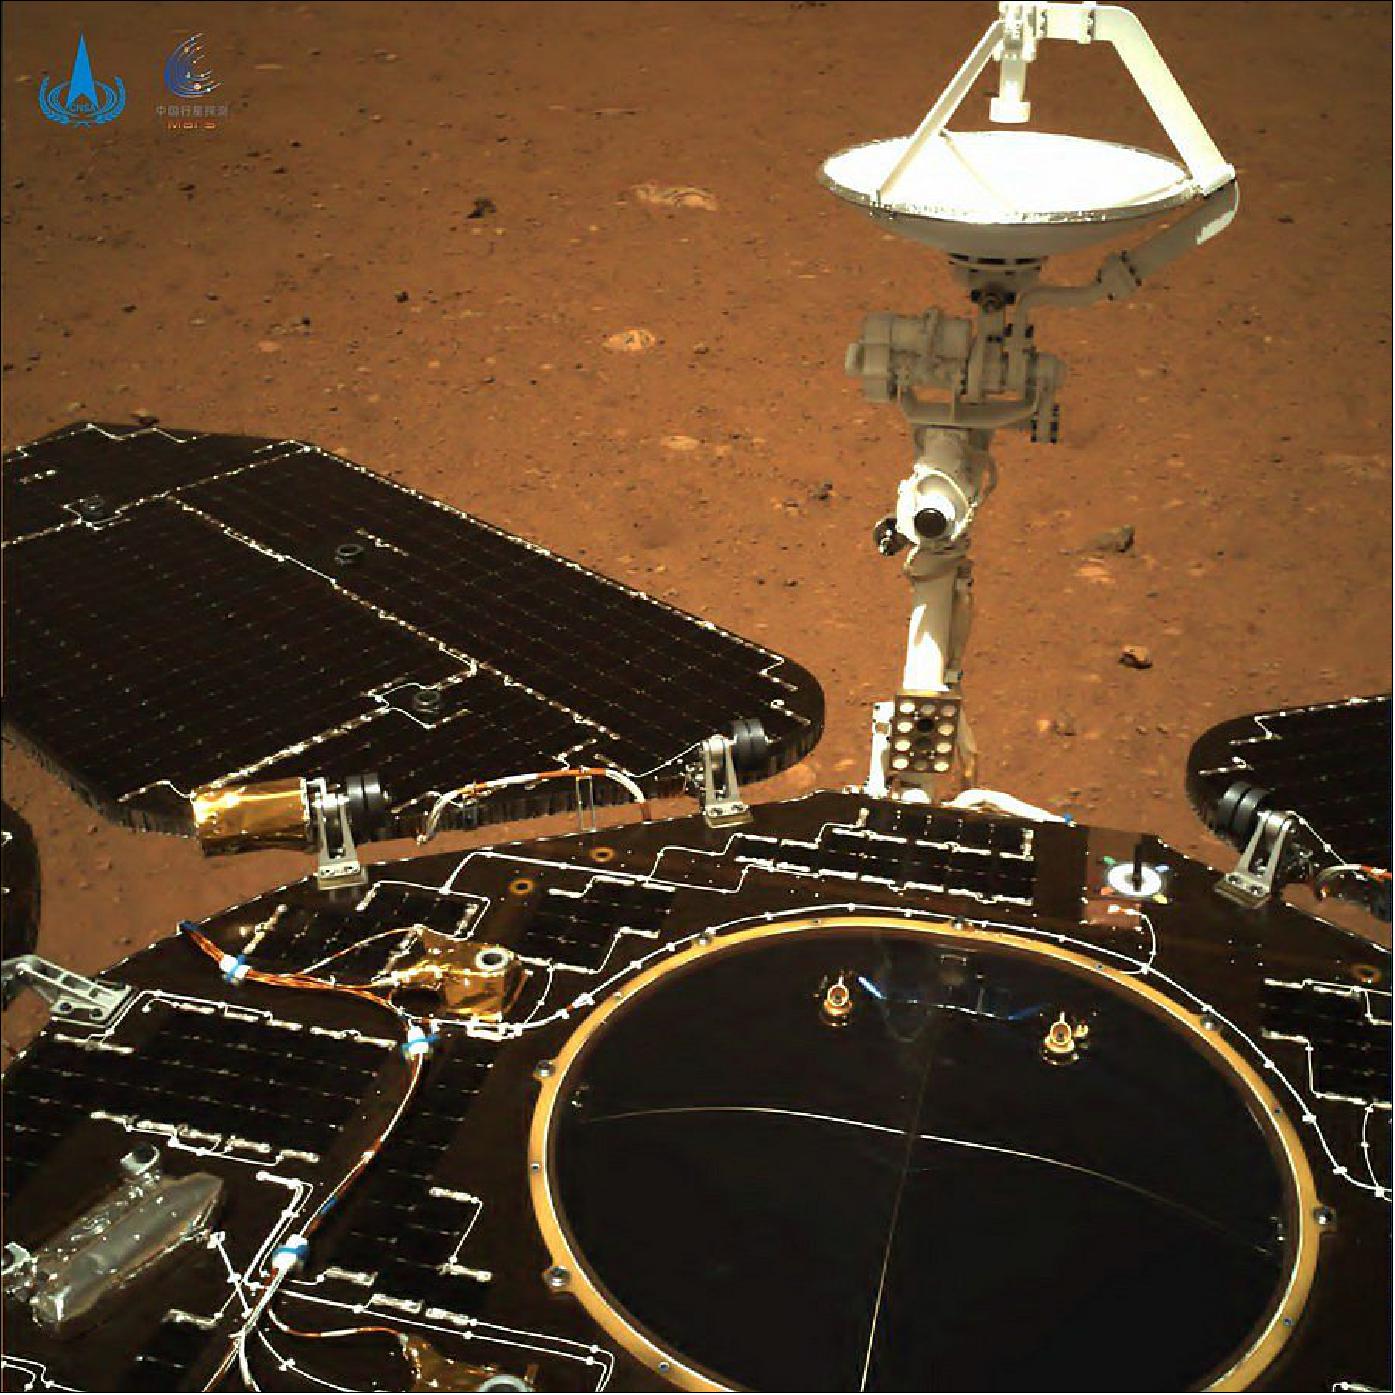 Figure 21: In the color photo taken by the navigation camera of Tianwen-1 probe towards the rear of the rover, the rover's solar panels and antenna are seen unfolded, and the red soil and rocks on the Martian surface are clearly visible (image credit: CNSA)